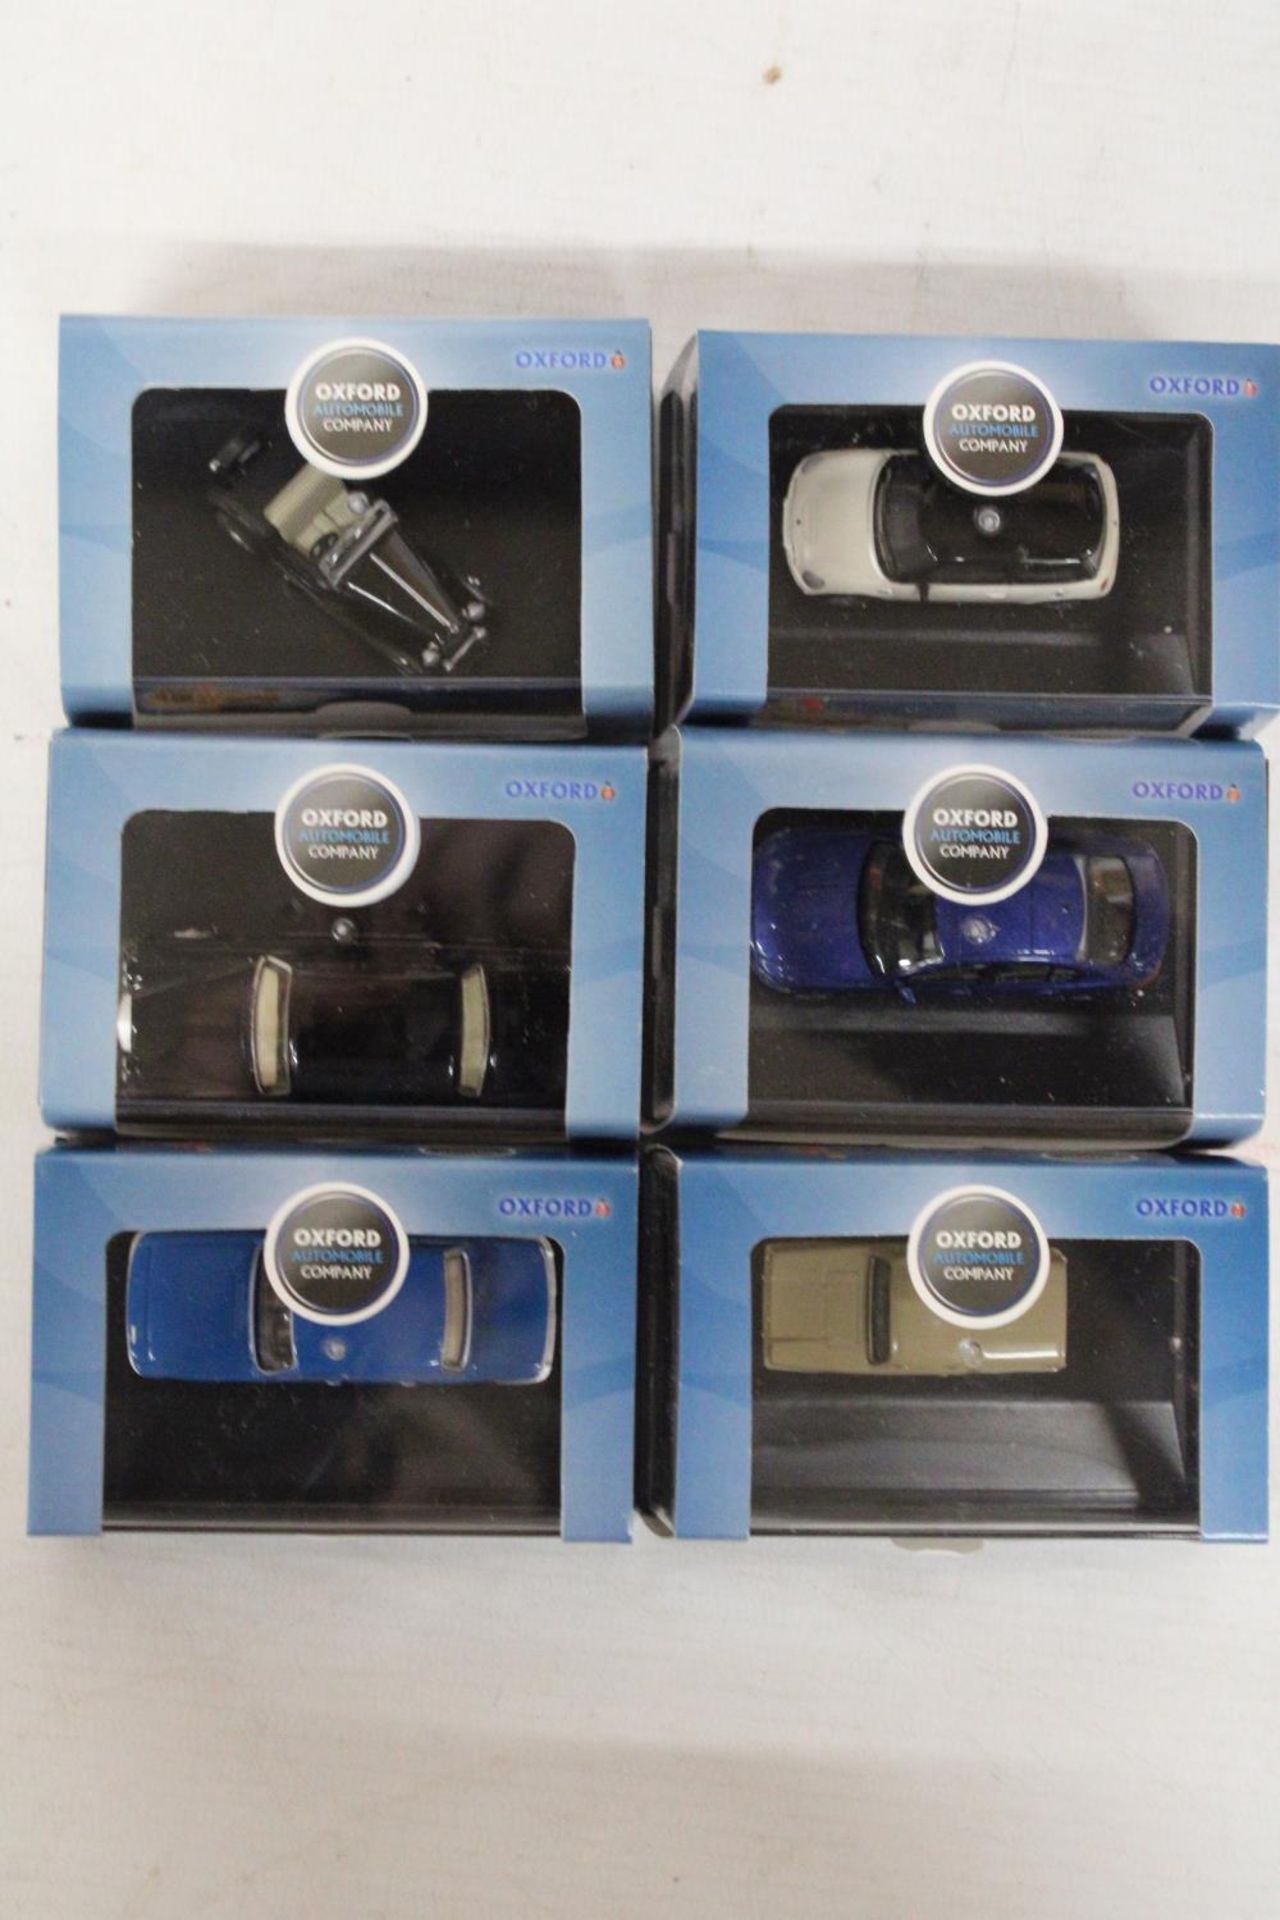 SIX VARIOUS AS NEW AND BOXED OXFORD AUTOMOBILE COMPANY VEHICLES - Image 6 of 8